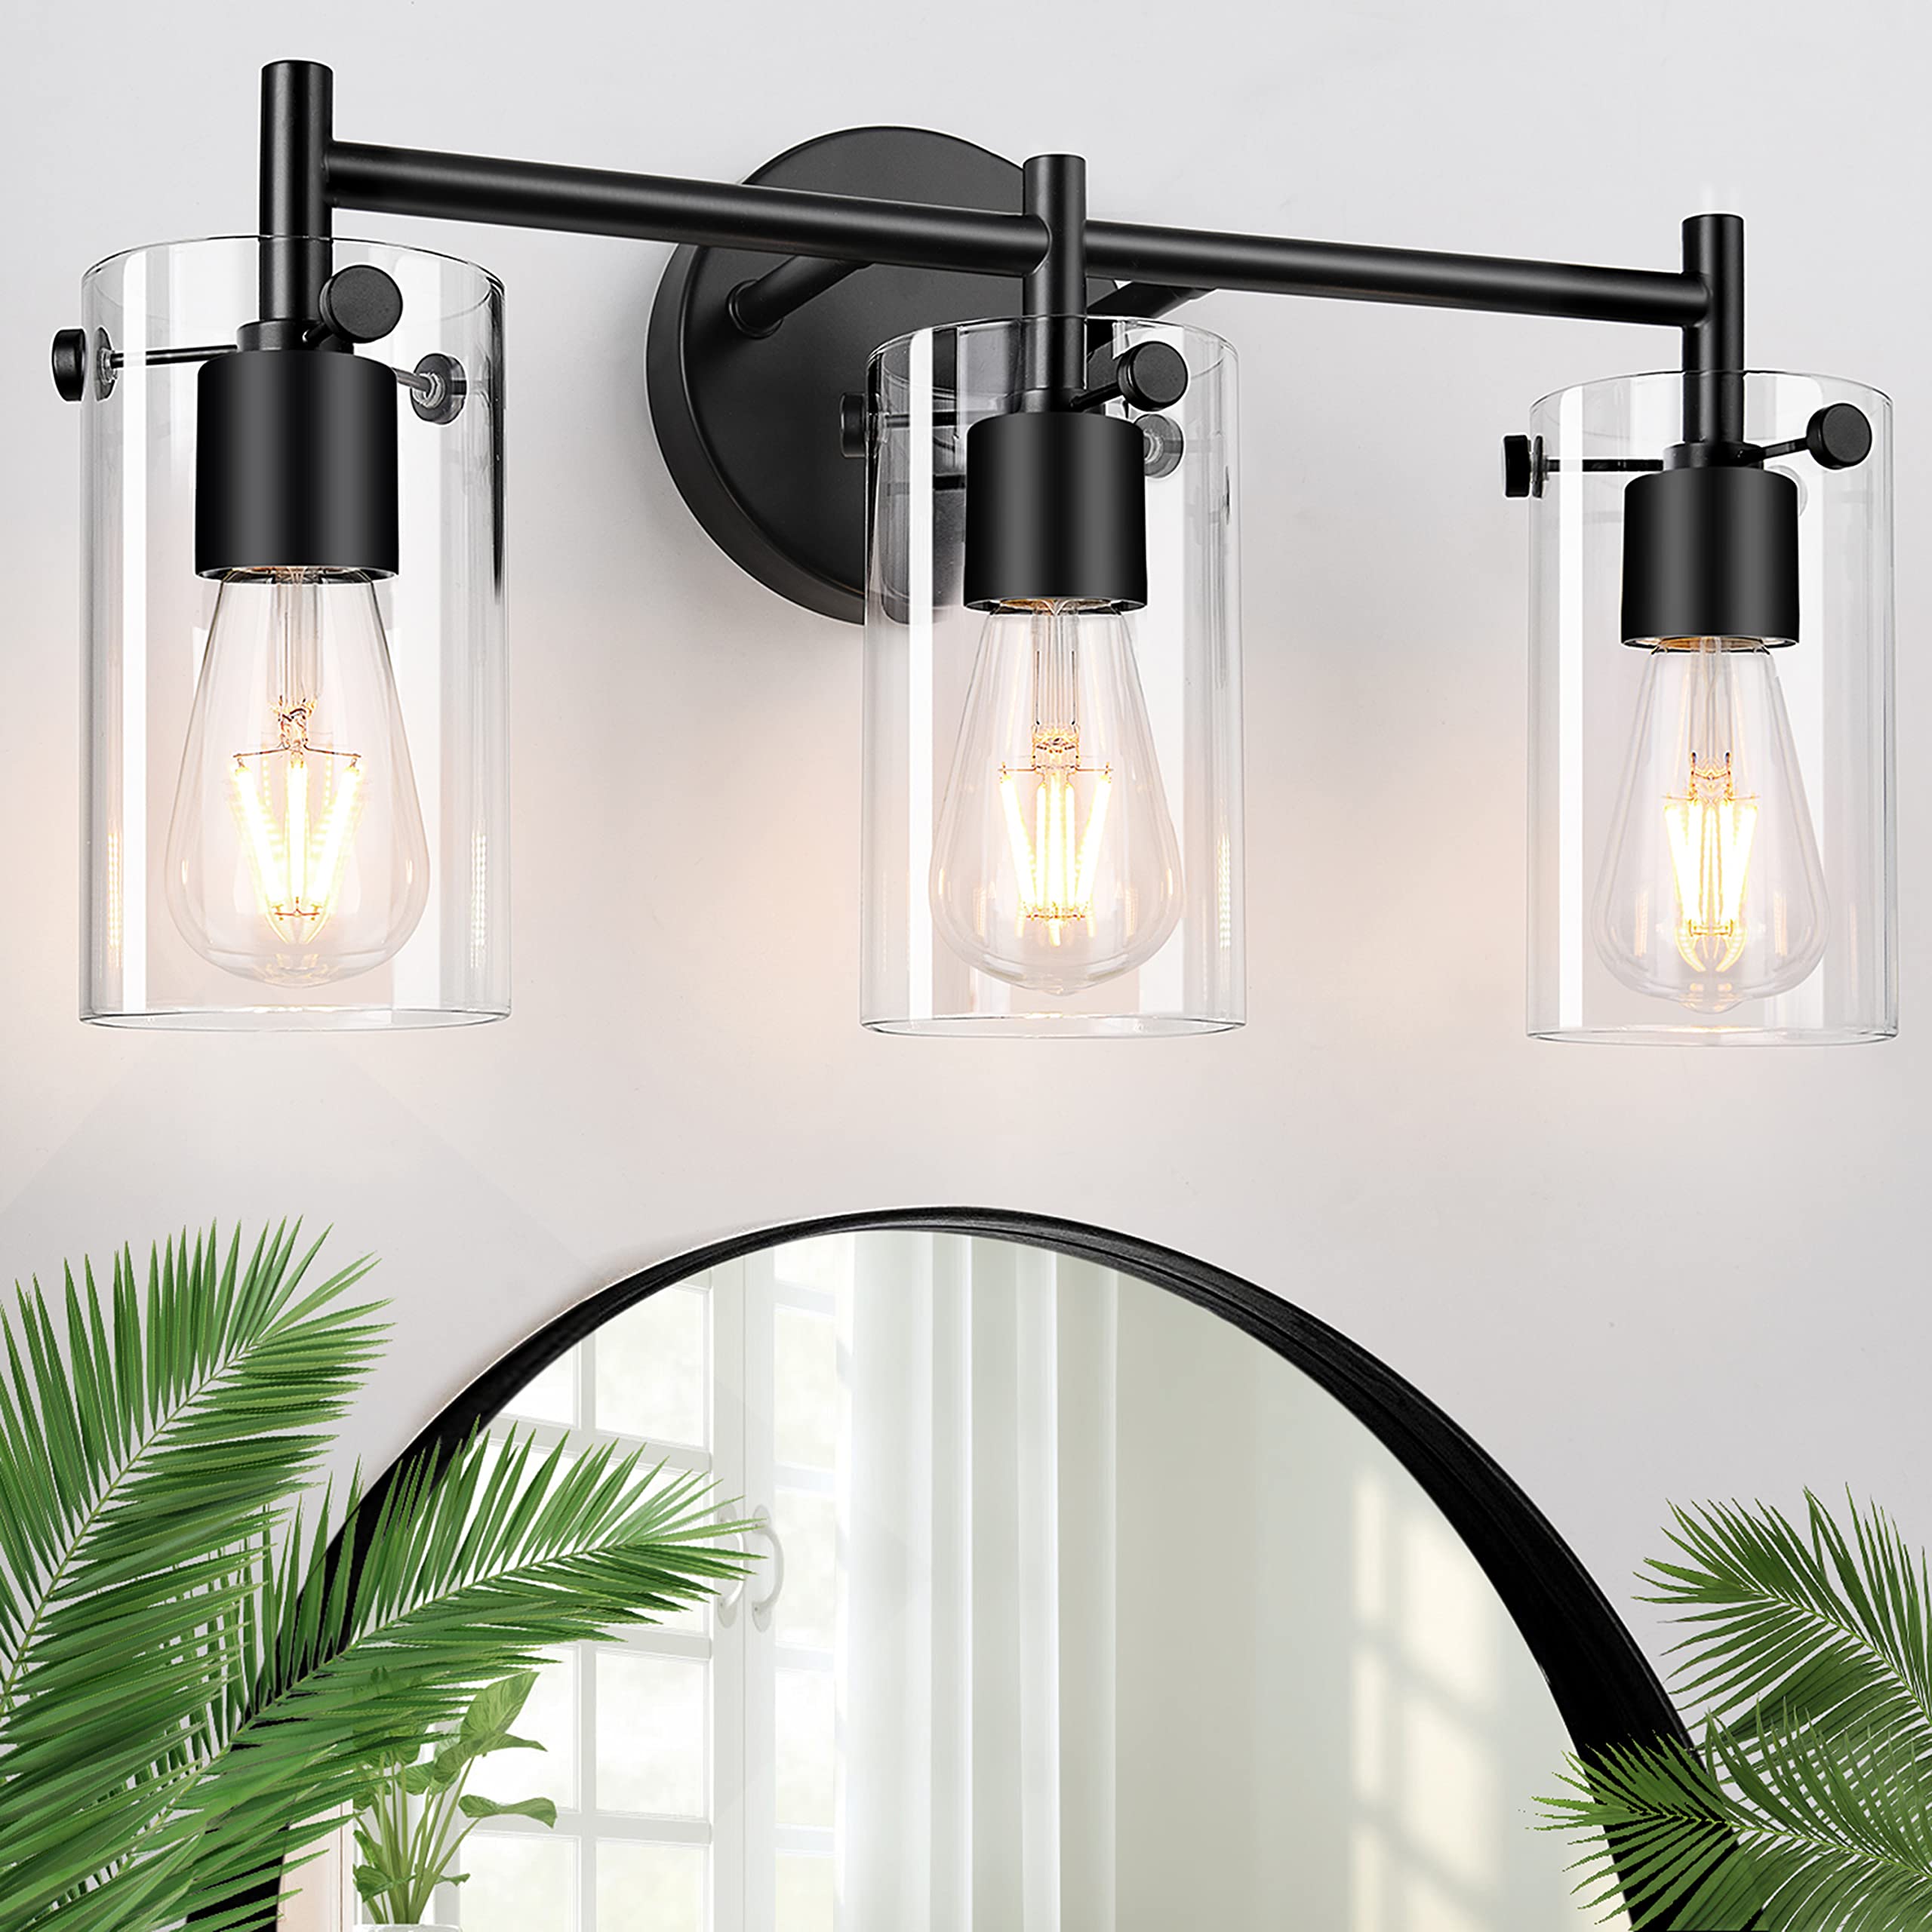 Bathroom Light Fixtures 2023 Upgrade, 3-Light Matte Black Bathroom Vanity Light, Black Bathroom Lights Over Mirror with Clear Glass Shade, Bathroom Wall Sconces for Mirror Bedroom Living Room Hallway